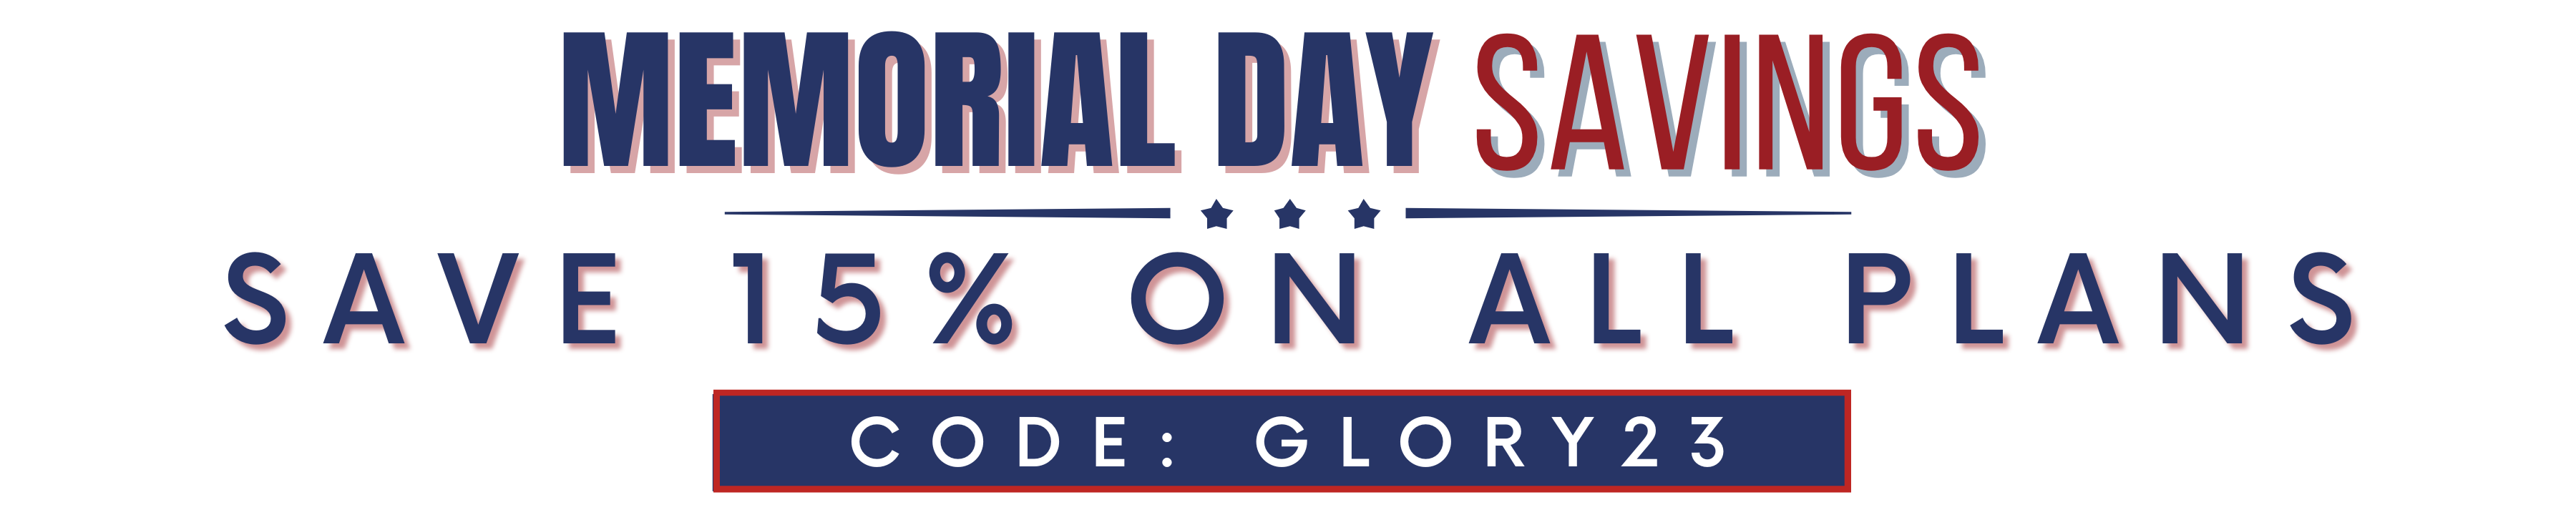 Memorial Day Sale! - Save 15% On ALL House Plans | Code: GLORY23